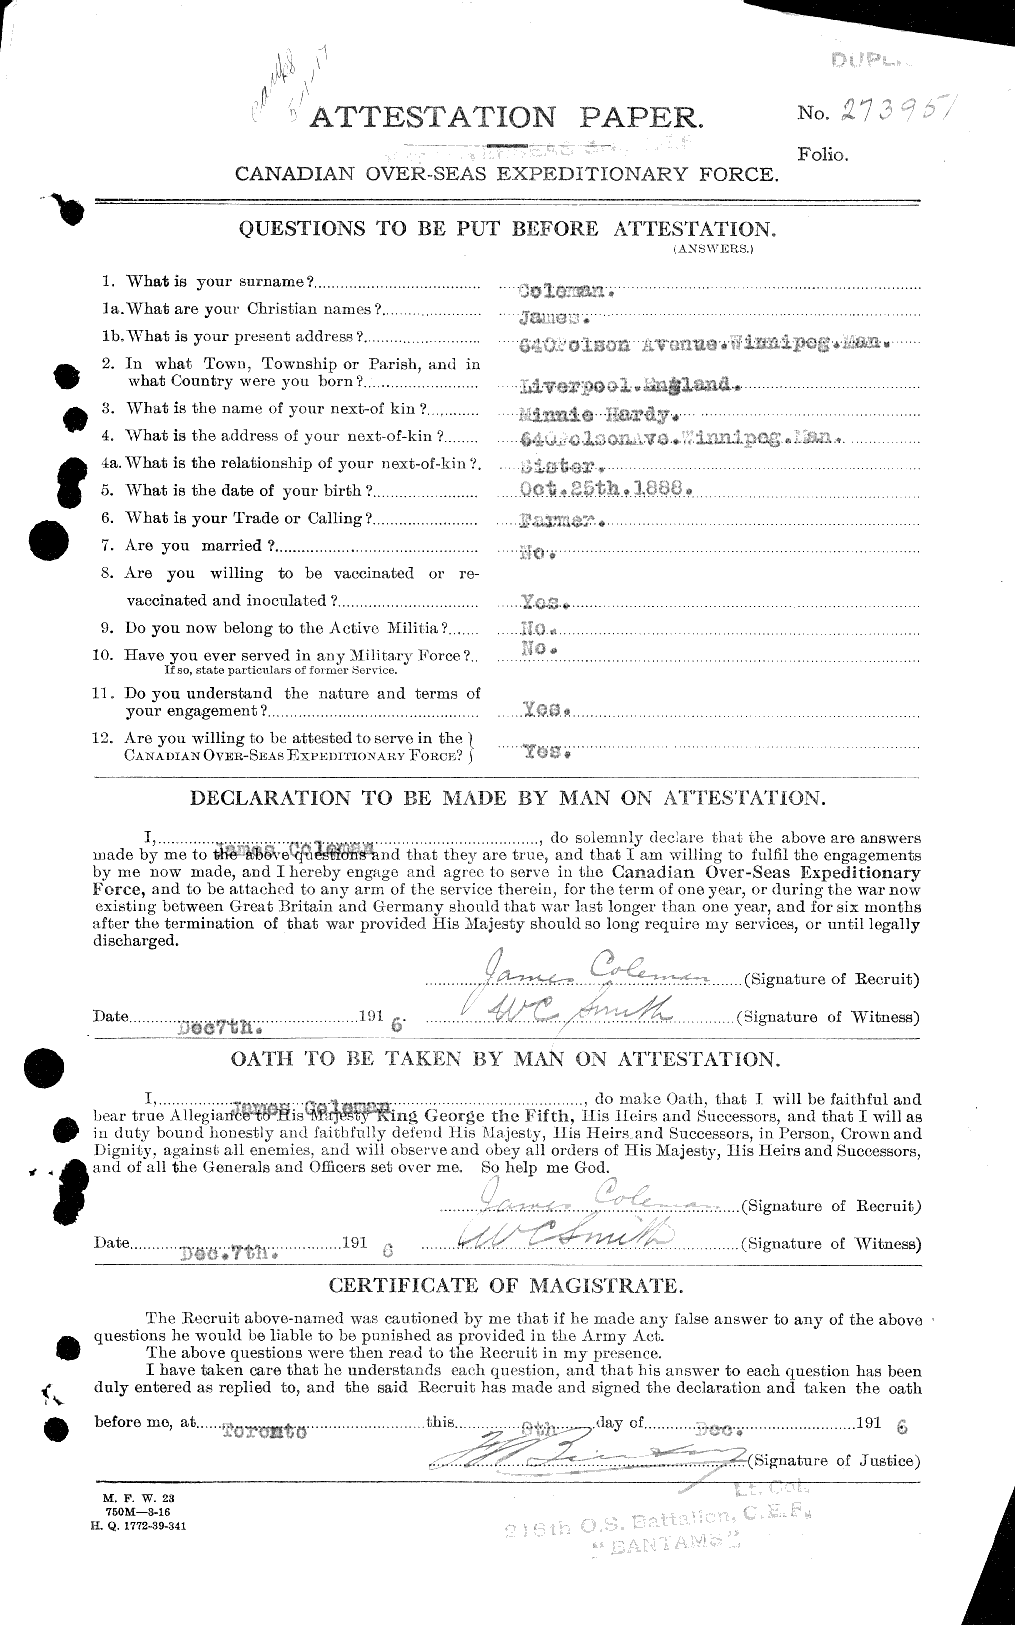 Personnel Records of the First World War - CEF 028186a